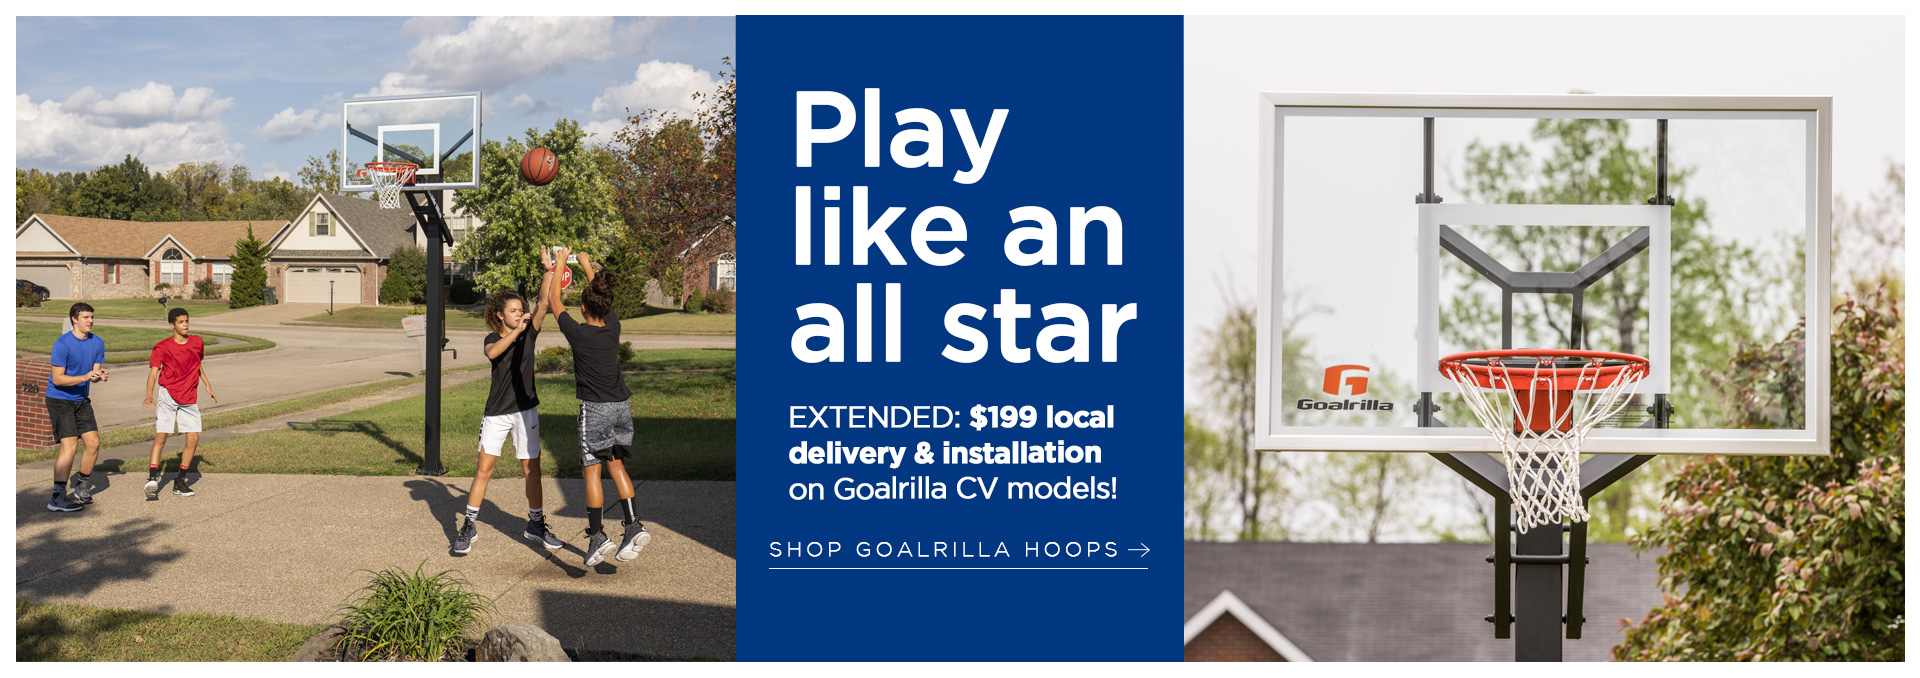 Play like an all star! Extended deal: delivery and installation for just $199 on Goalrilla CV models